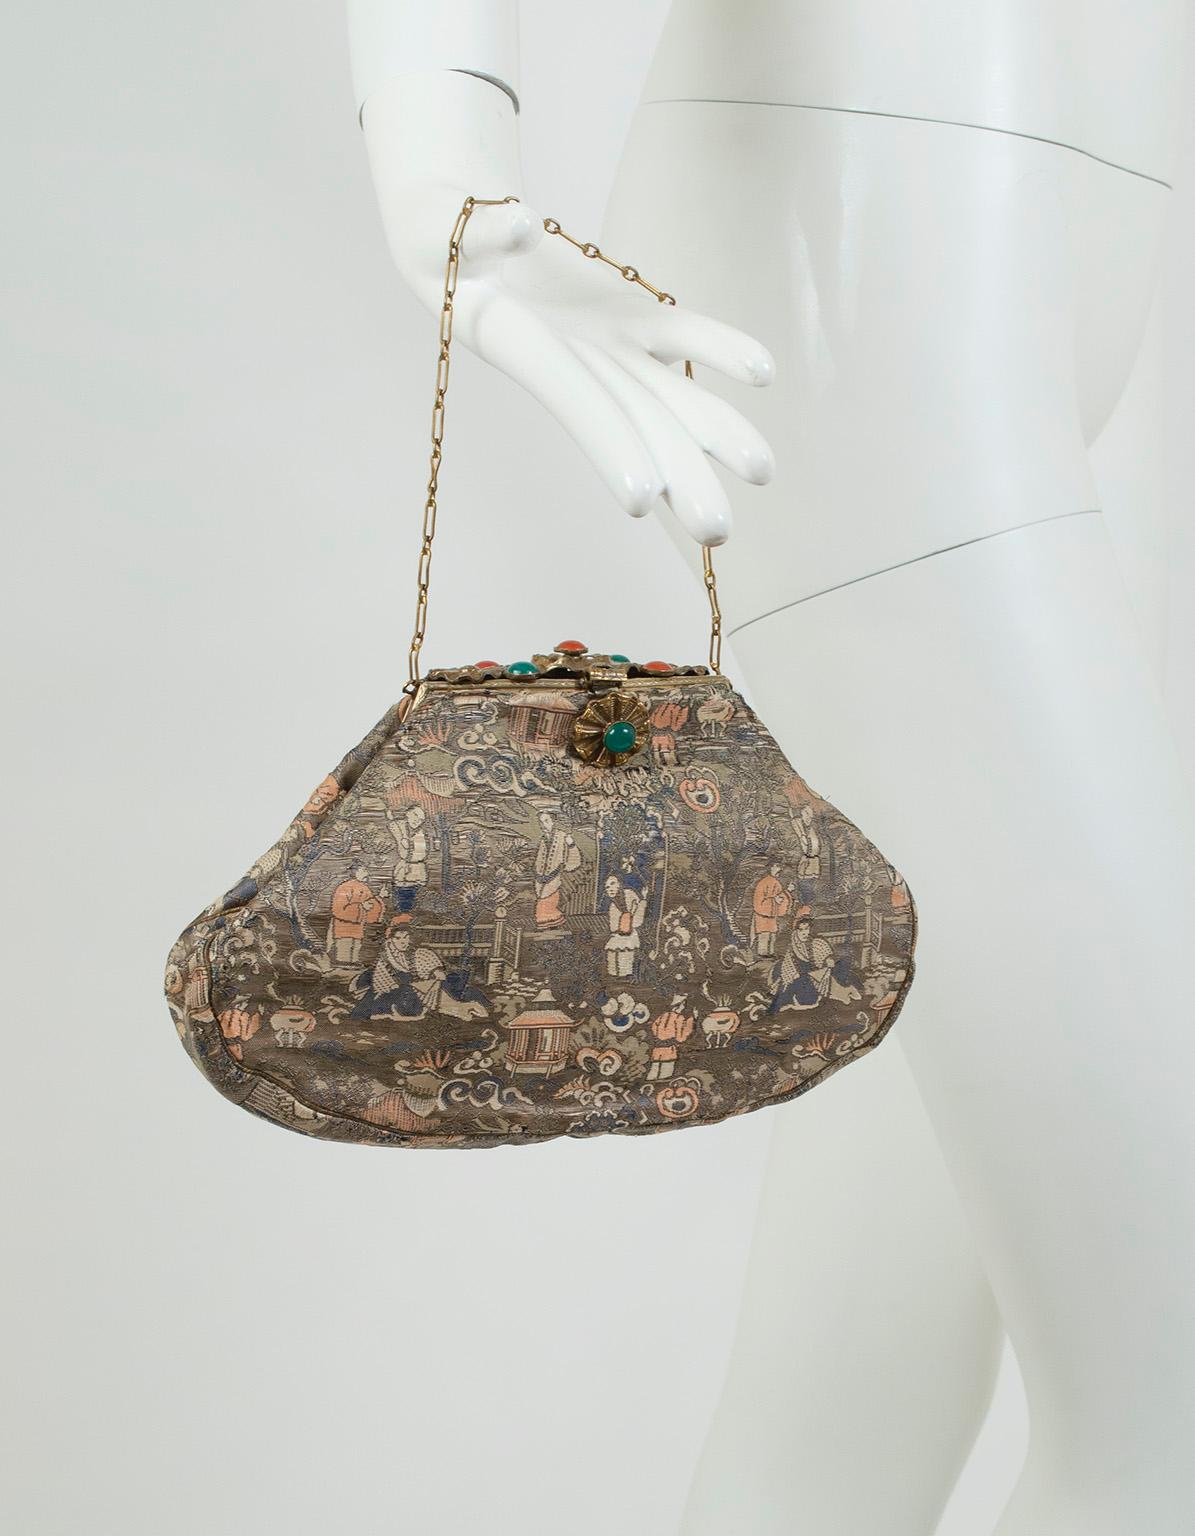 Subtly striking, this exquisite silk handbag features a muted Chinoiserie motif that would be remarkable on its own were it not upstaged by its unique figured brass top lid, which is worked to resemble rigid flowers with coral and emerald cabochons